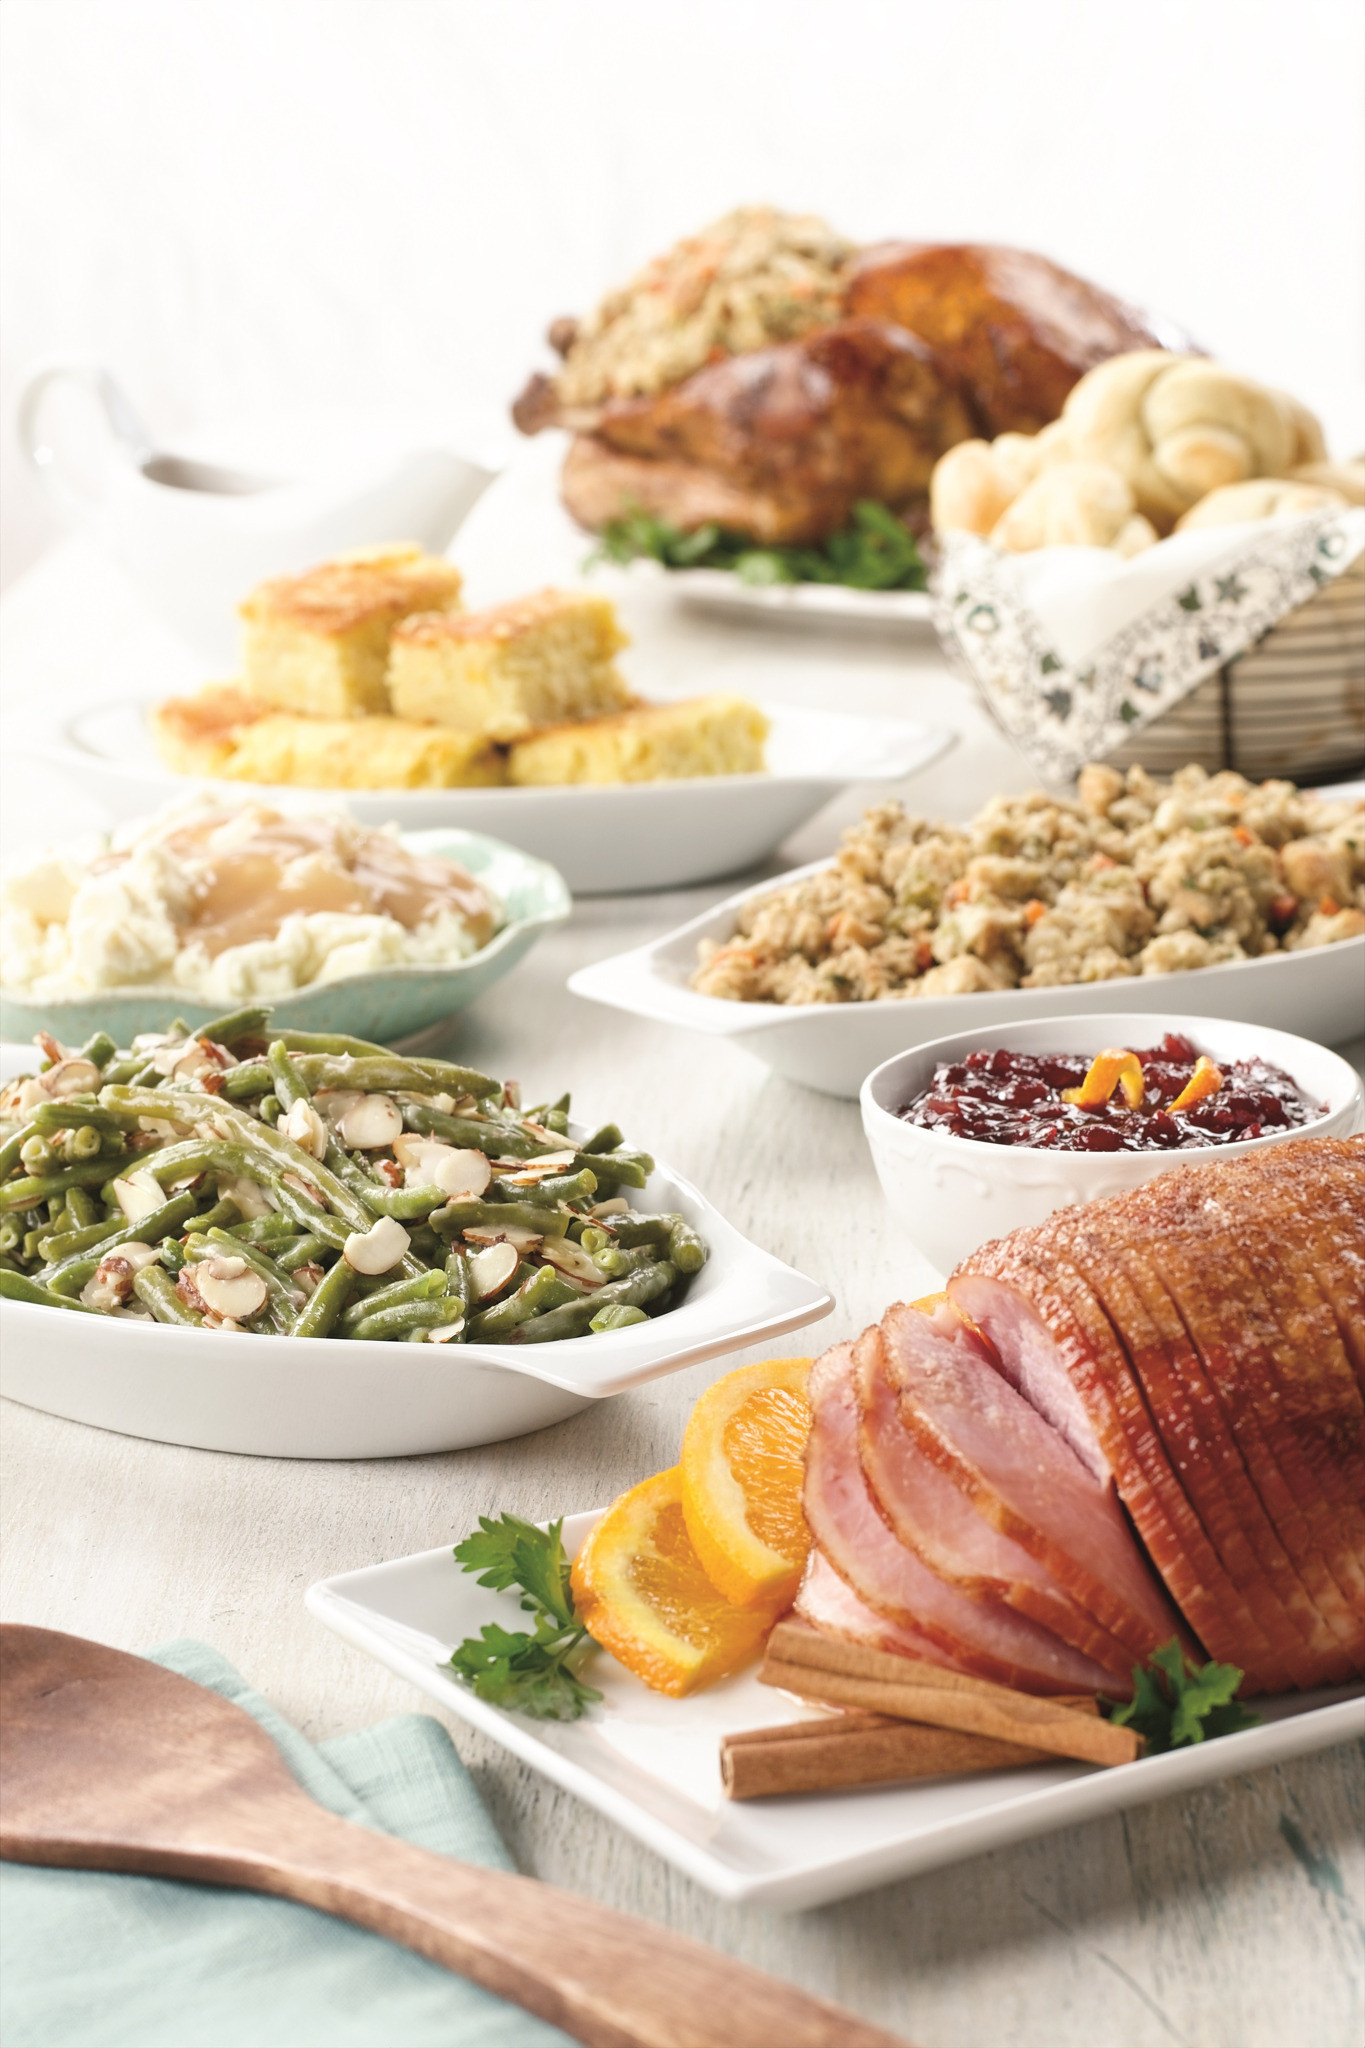 Fresh Market Thanksgiving Dinners
 The Fresh Market Provides Holiday Meal Options for an